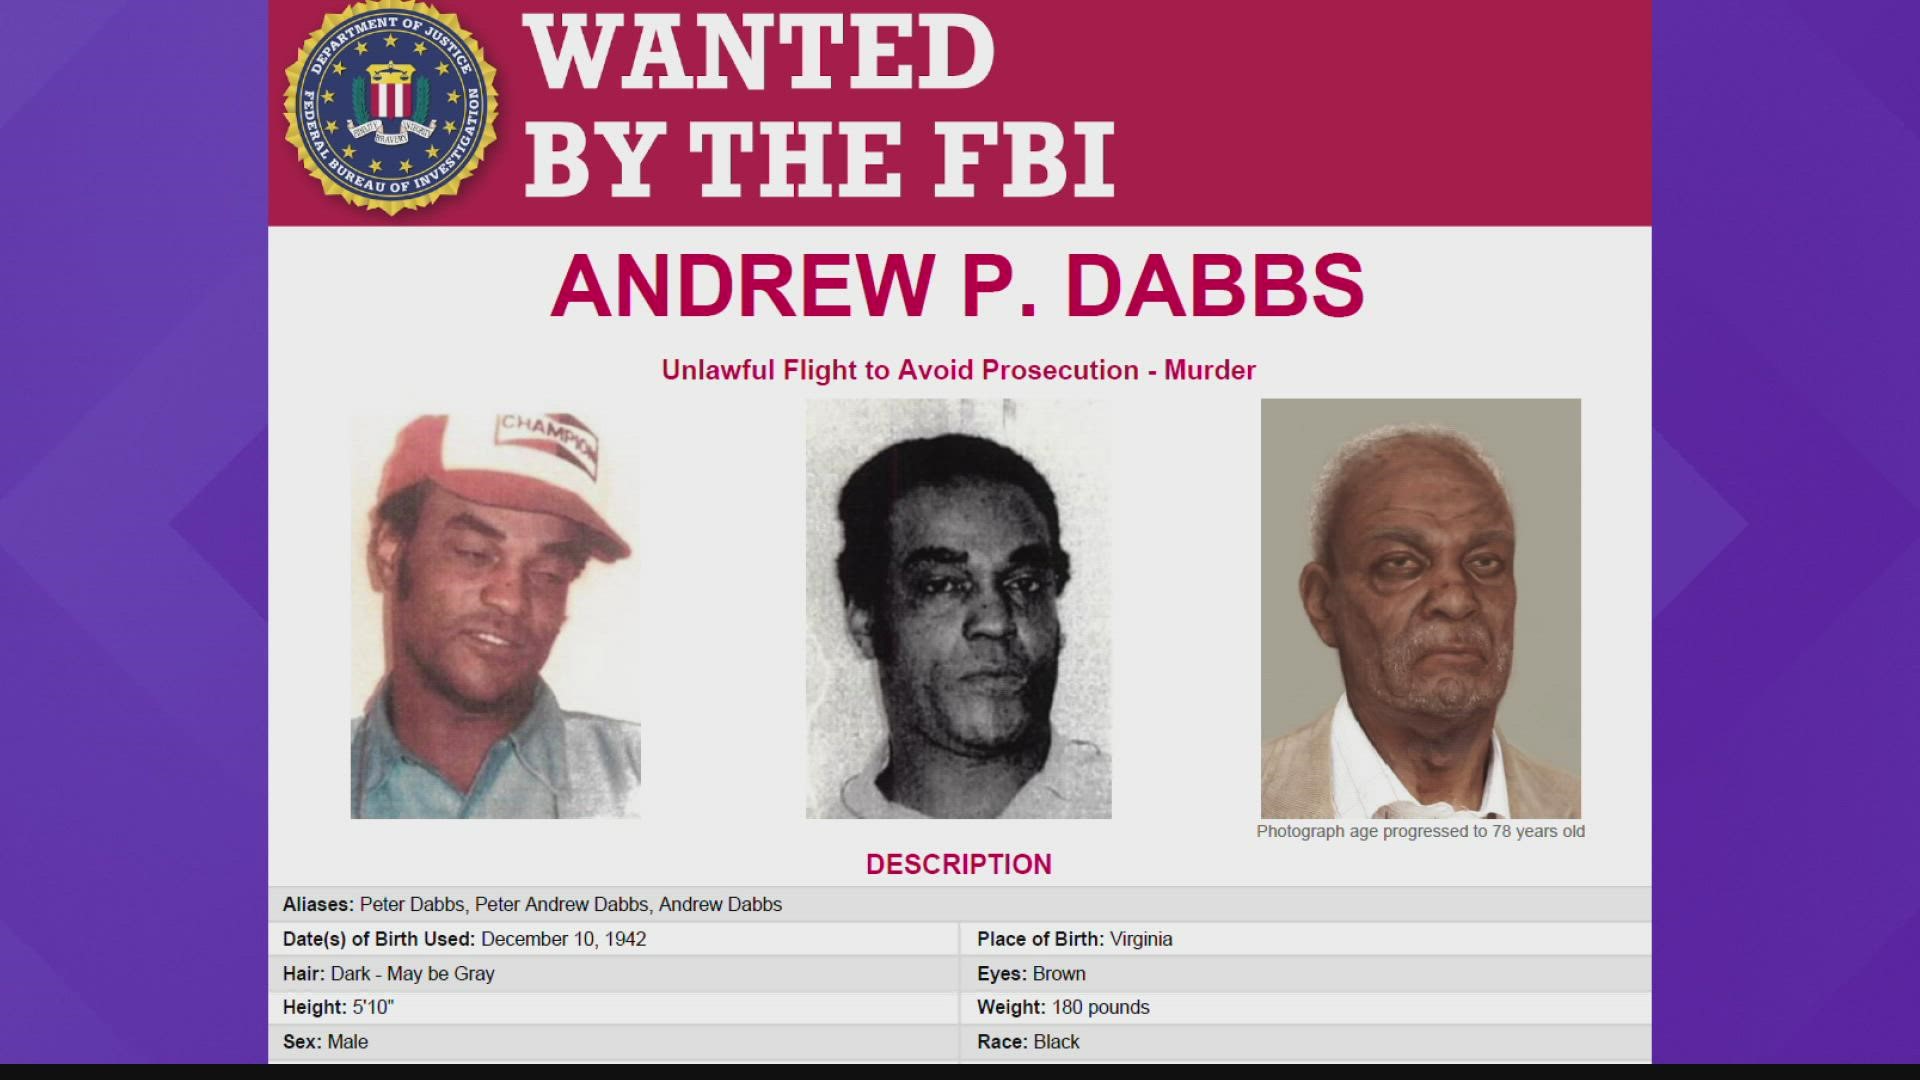 The FBI is offering a reward up to $20,000 for information leading to Andrew P. Dabbs.